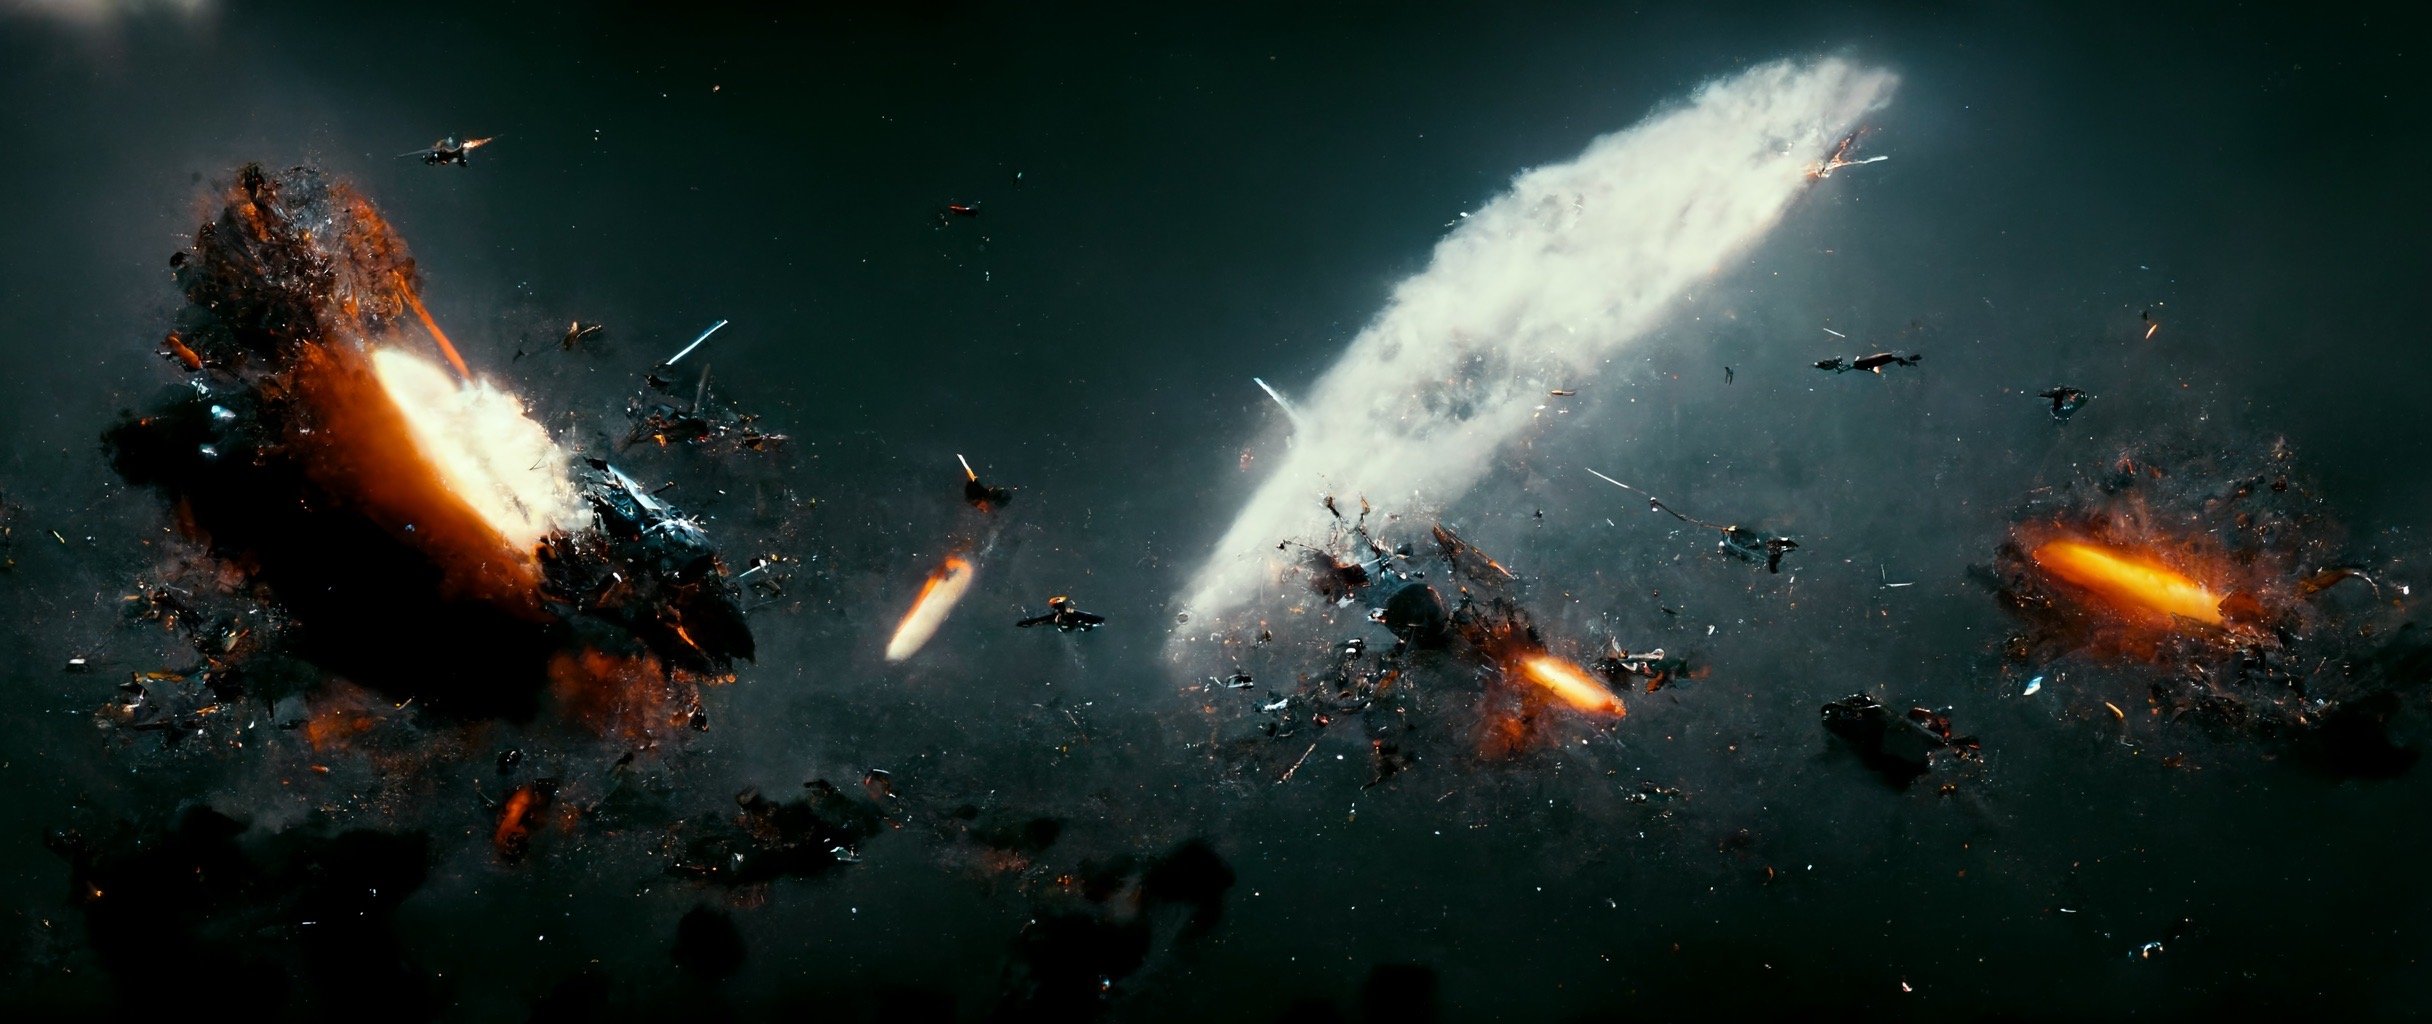 0dff72fc-afdb-4794-8f67-88381af66a13_S3RAPH_two_large_spaceships_crashing_into_each_other_explosions._Epic_dark_space_background._cinematic_comp.JPG